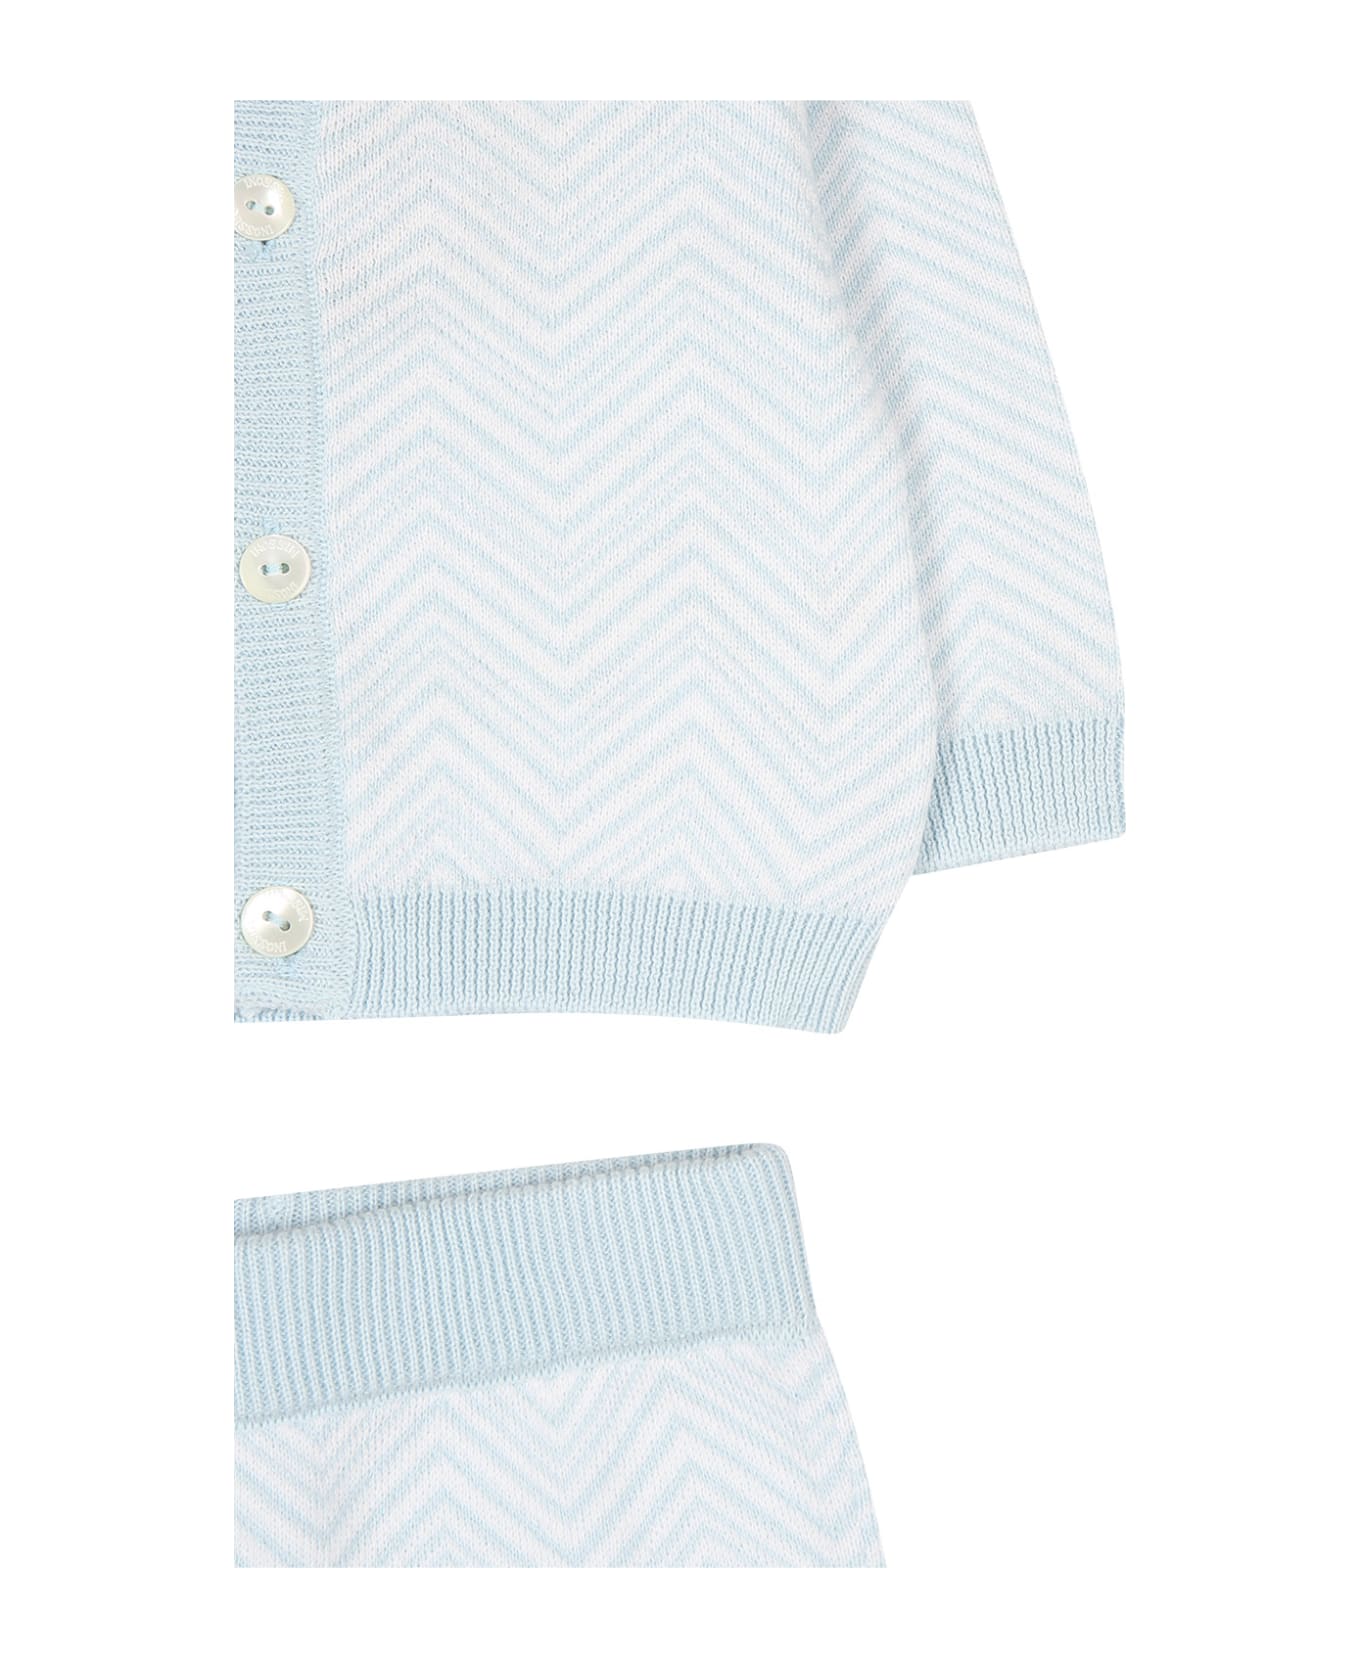 Missoni Sky Blue Birth Suit For Baby Boy With Chevron Pattern - Light Blue